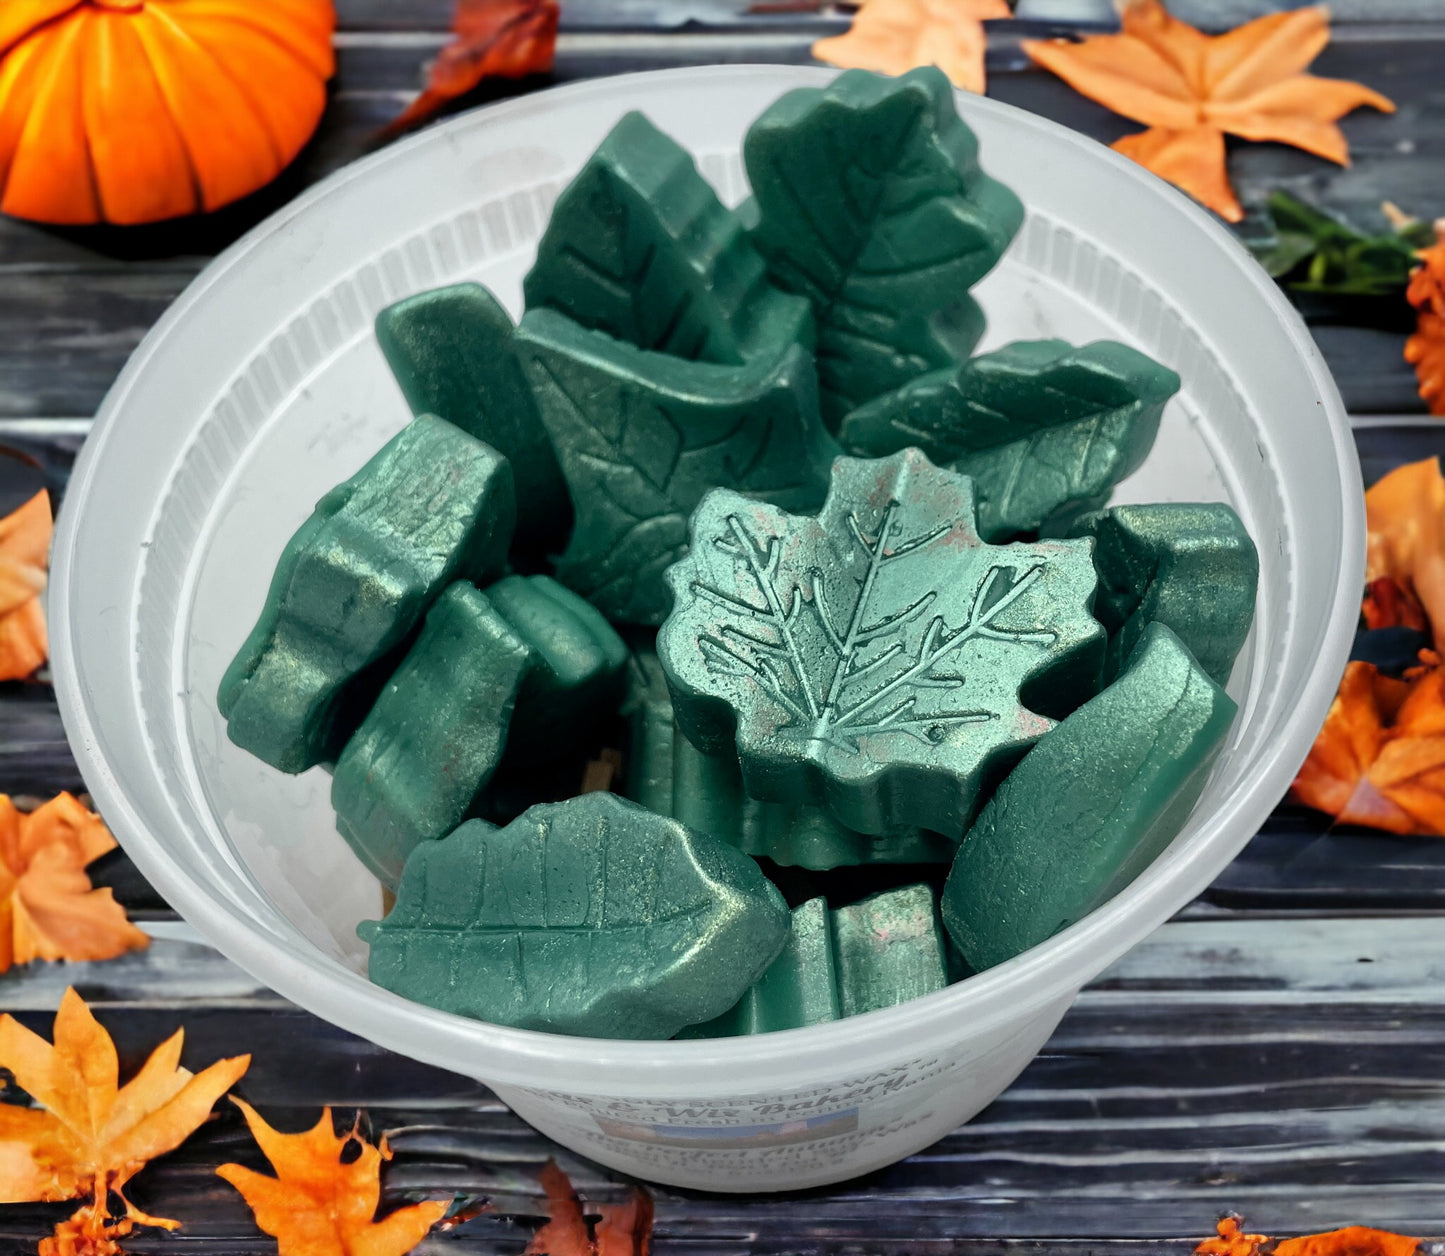 Leaves Wax Melts. The Perfect Autumn. 3 Oz. Soy Wax Melts/Leaf Shaped/Strongly Scented Wax Melts/Wax Tarts for Wax Warmers/Fall Wax Melts